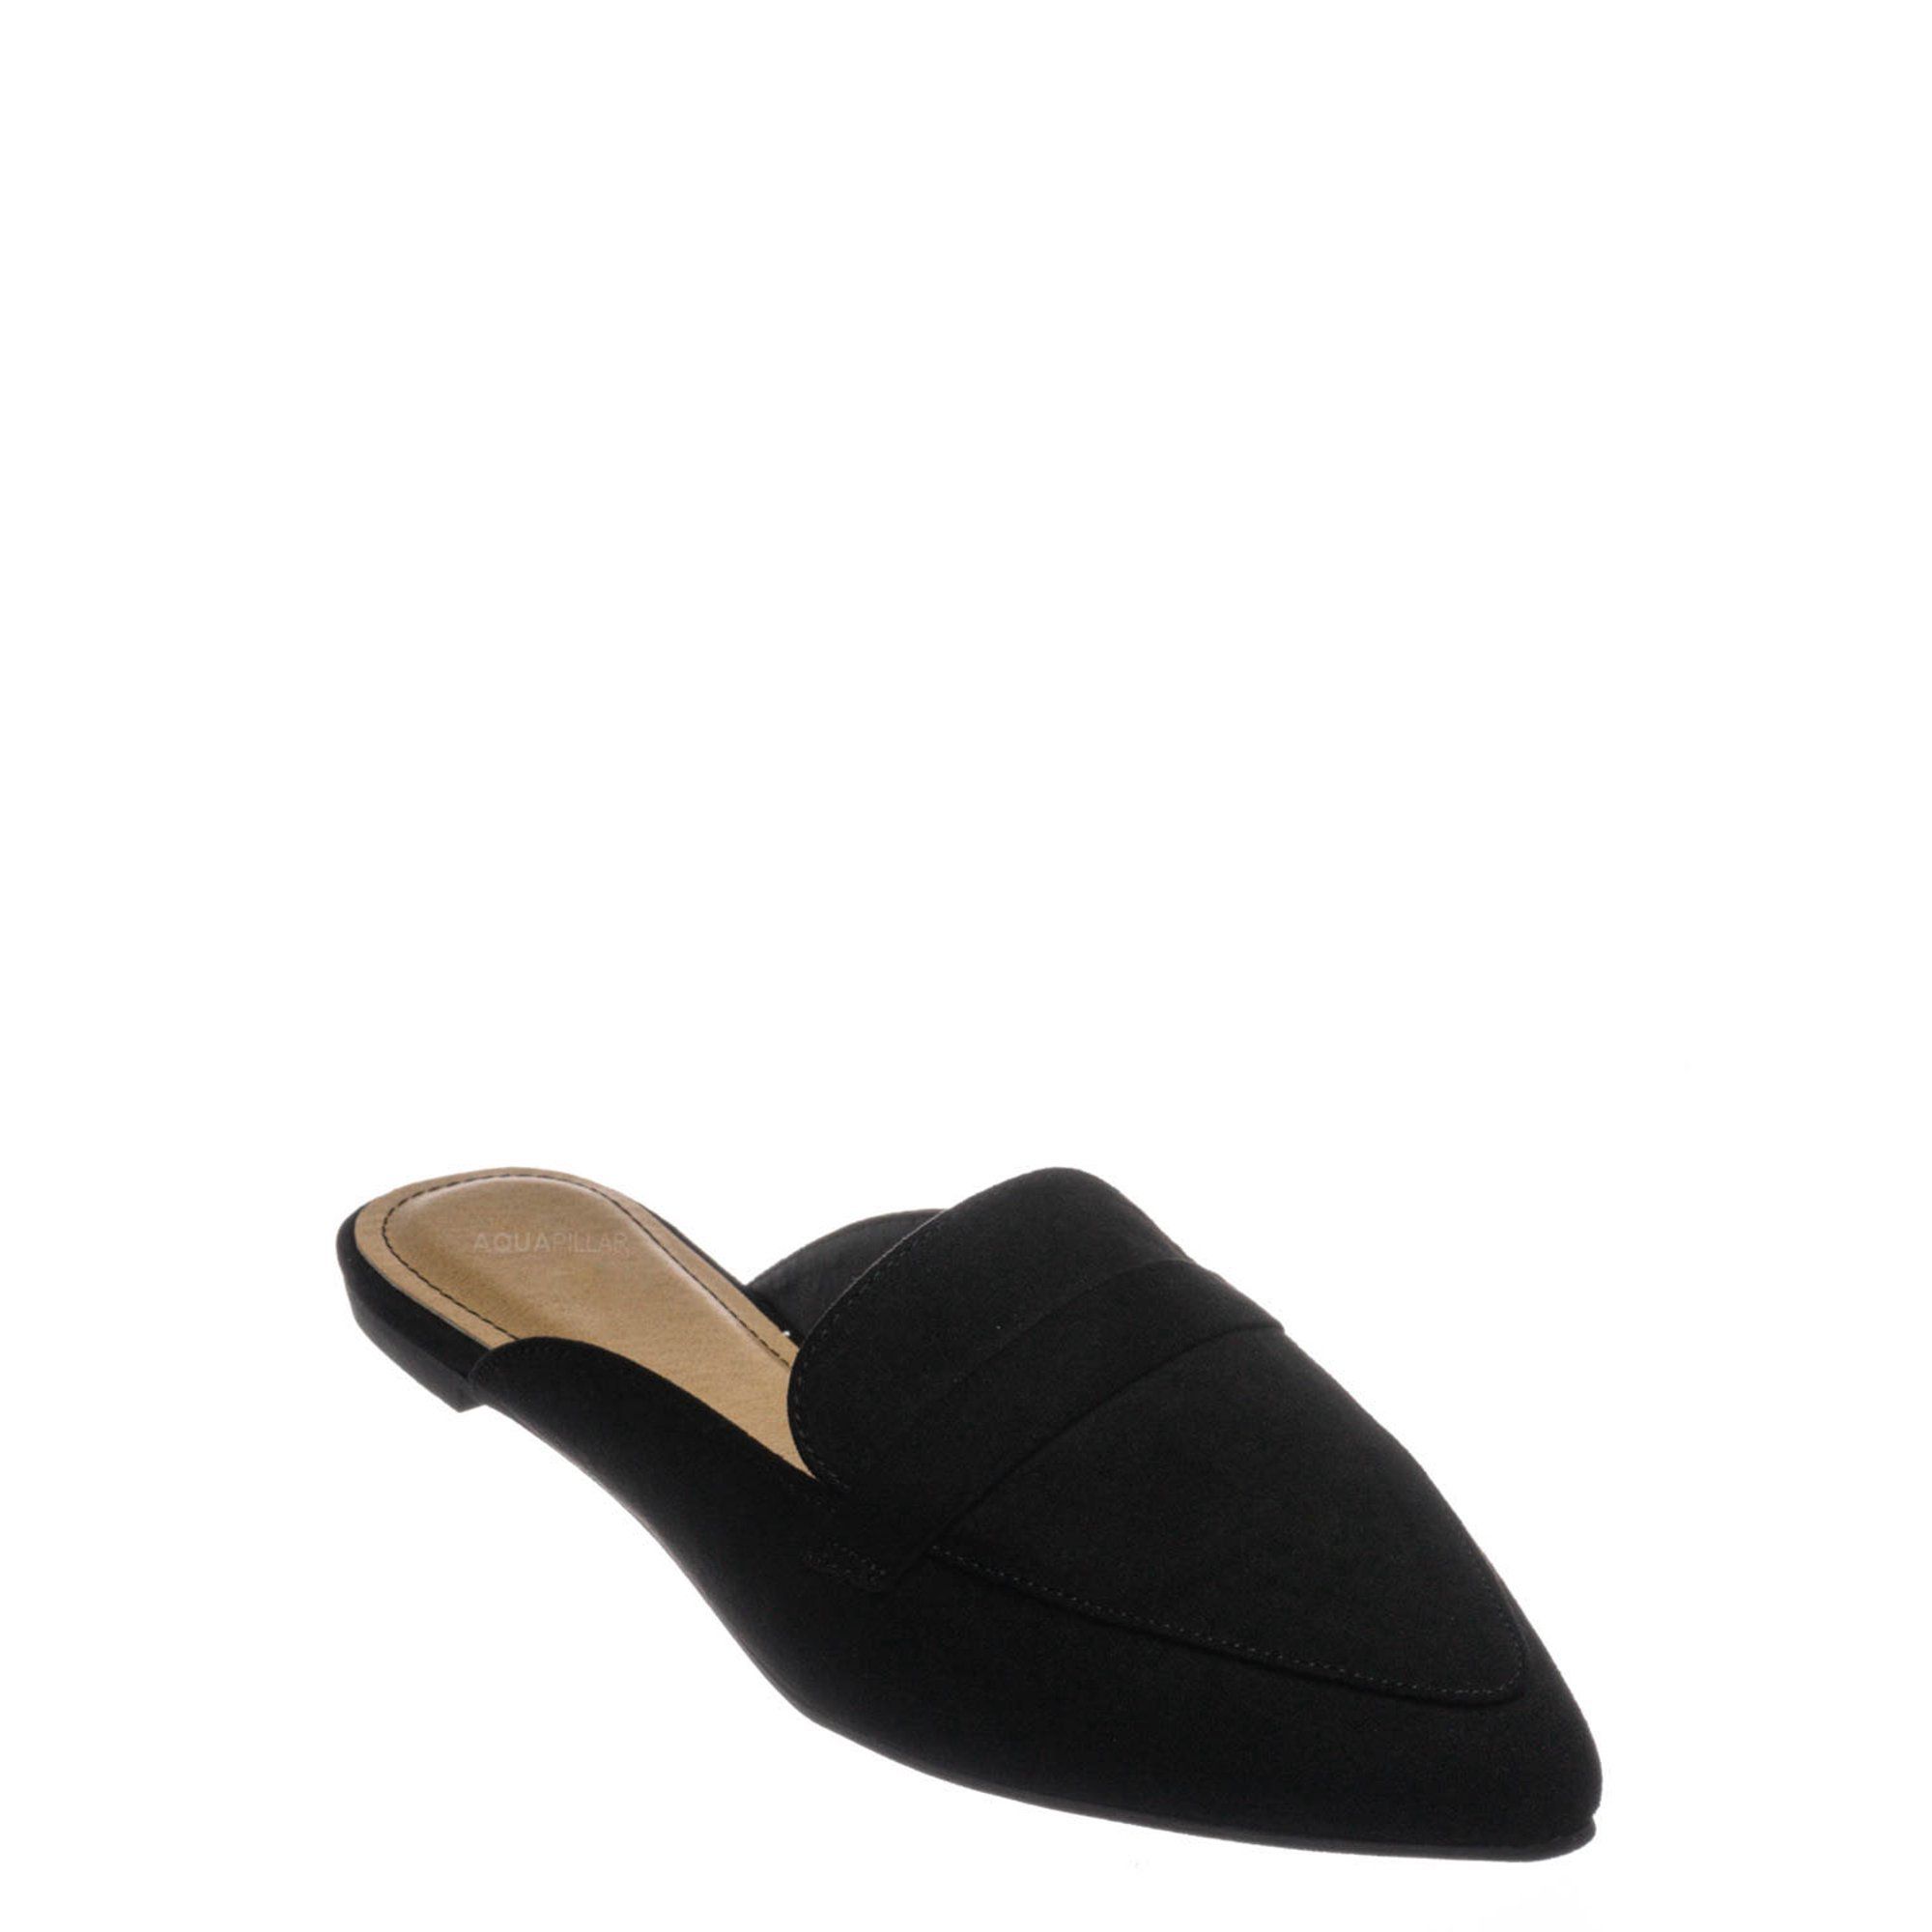 Diary55 by Bamboo, Pointed Toe Flat Mule - Women Slide In Backless Loafer w Parallel Band | Walmart (US)